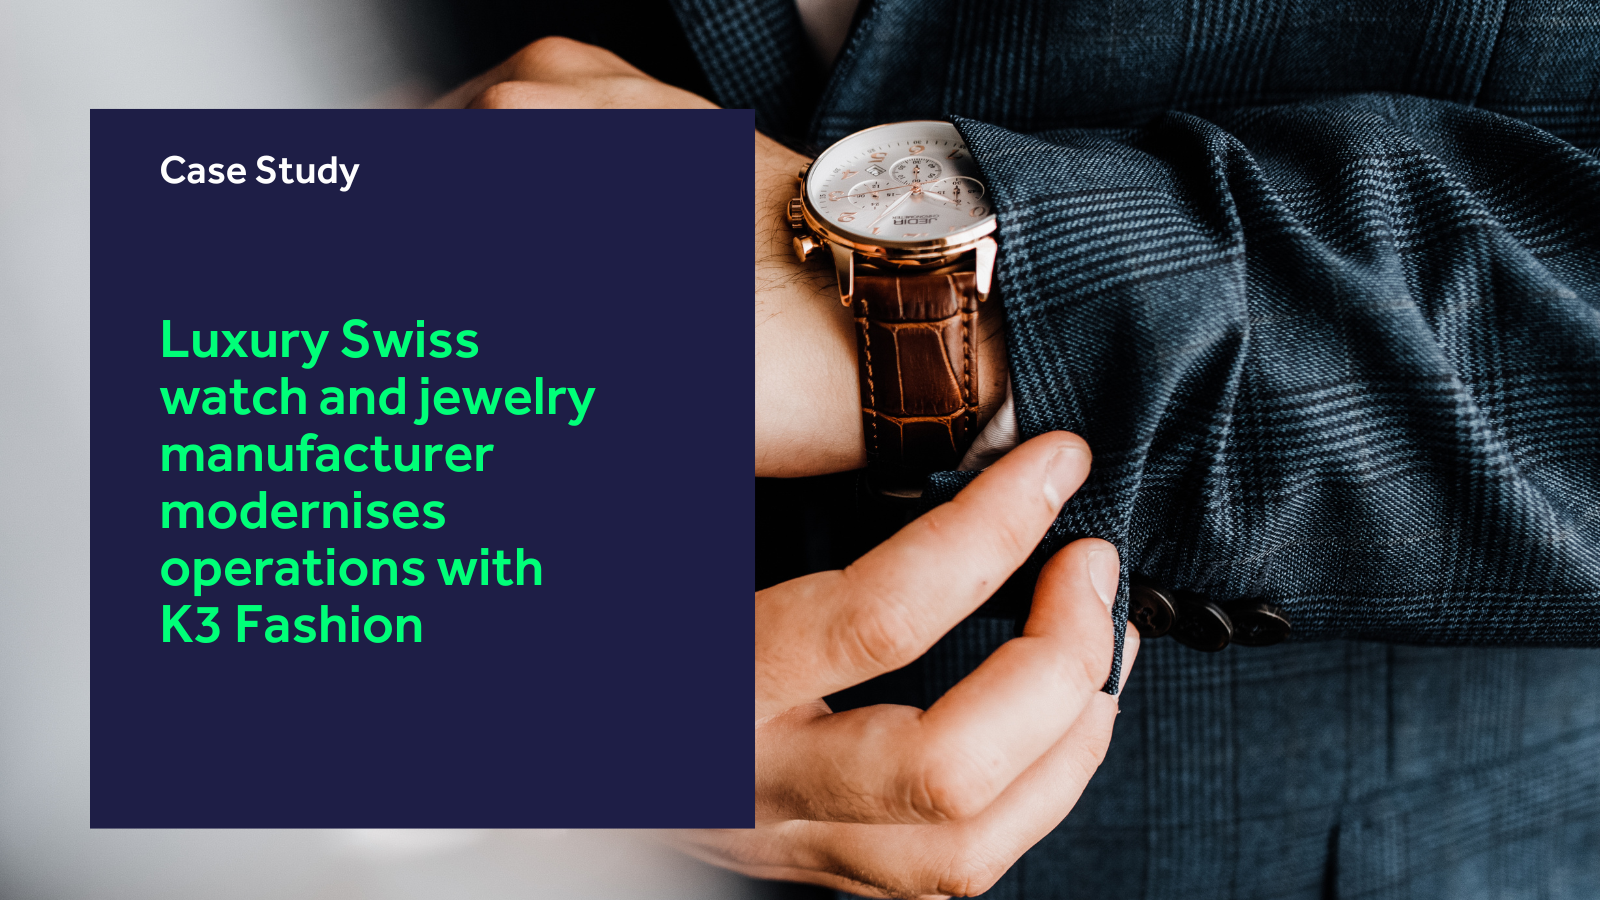 Luxury Swiss watch and jewelry manufacturer modernises operations with K3 Fashion blog header